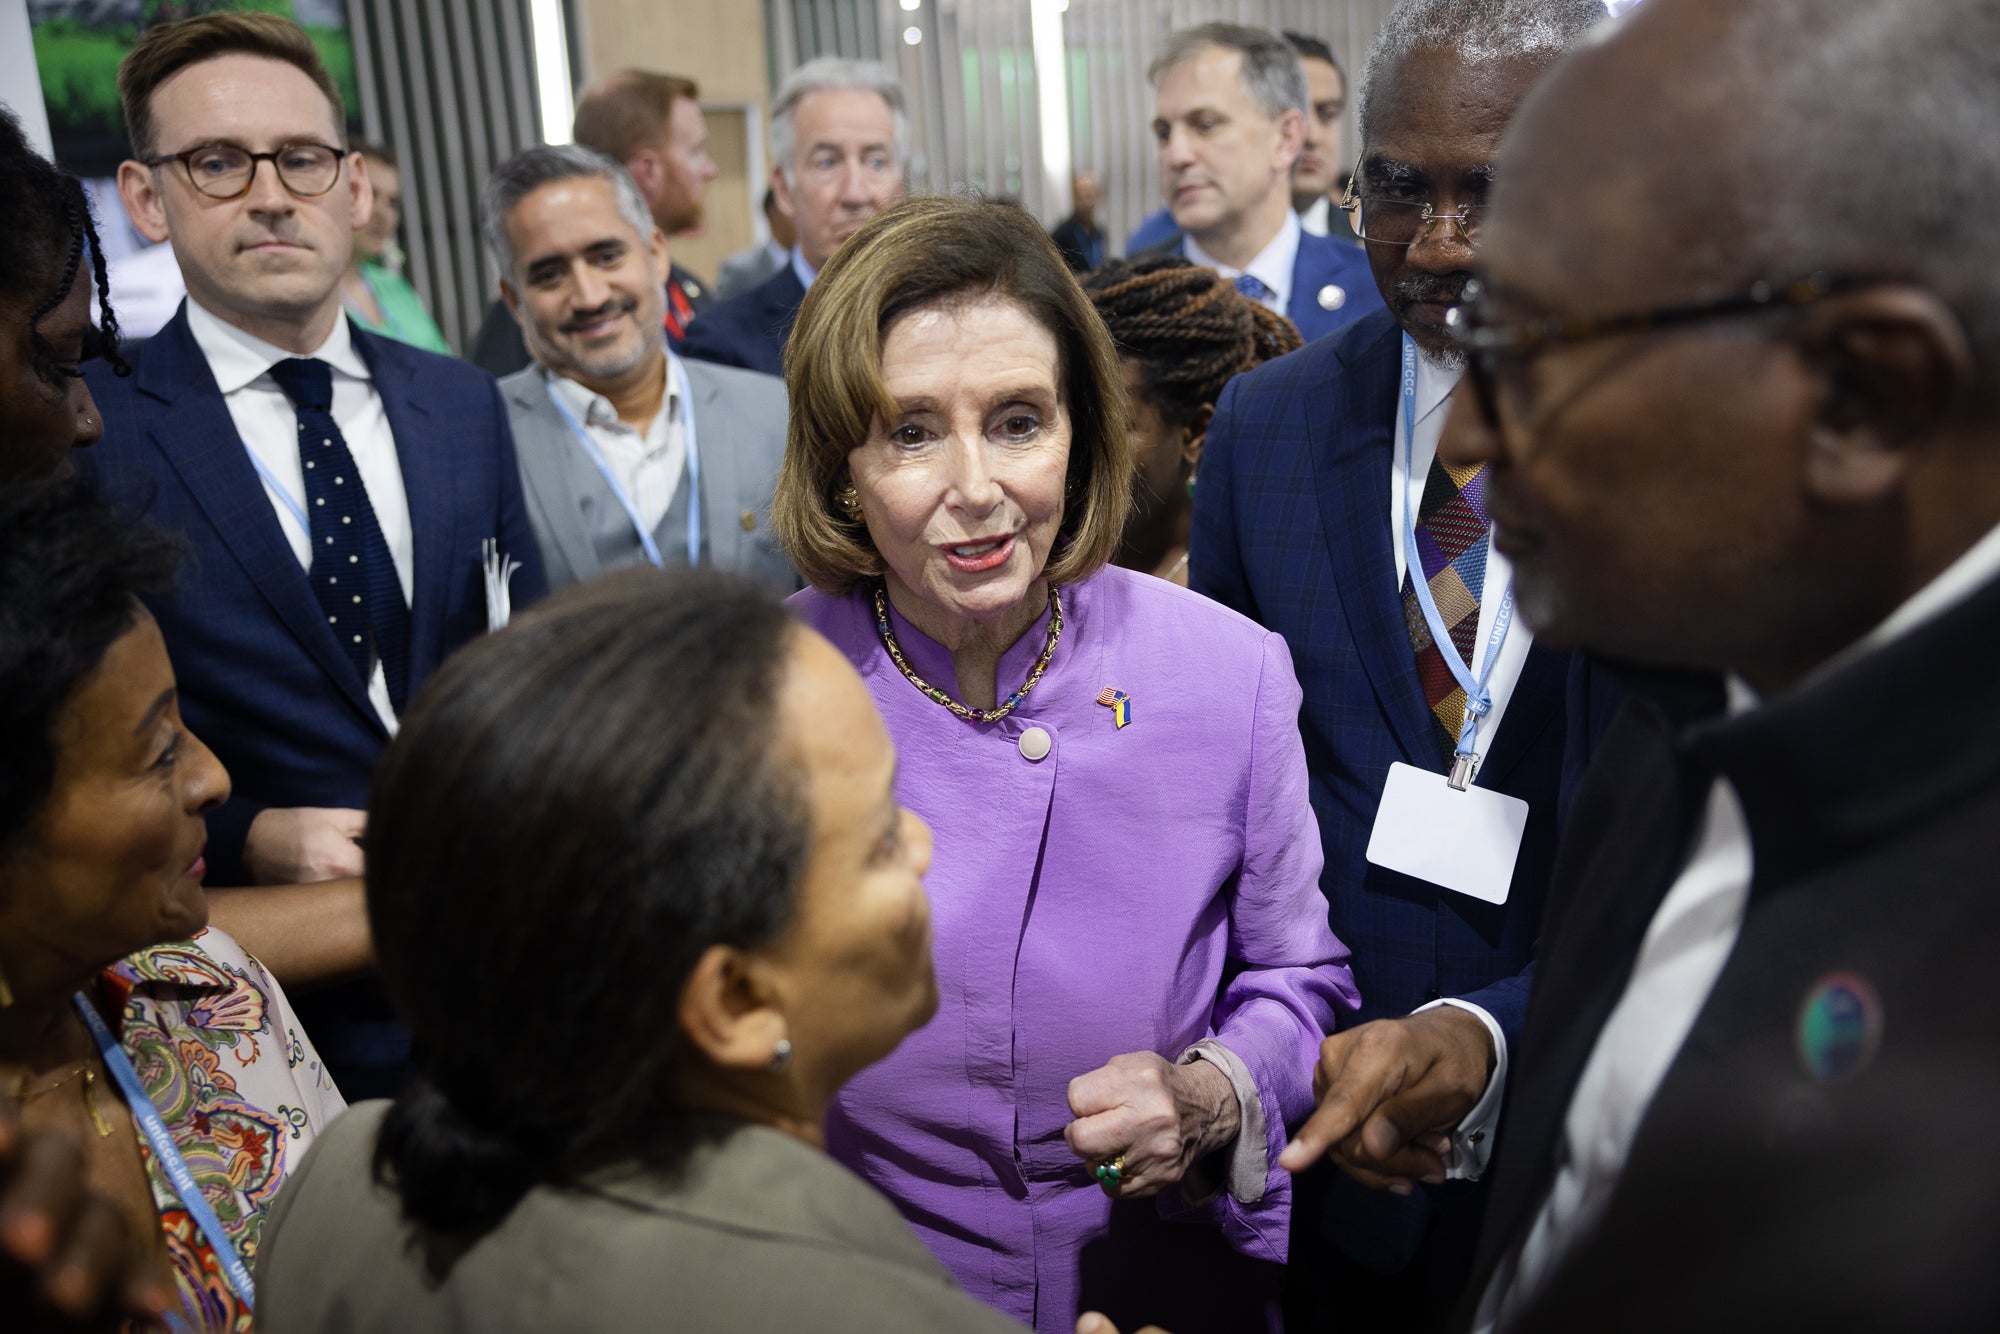 Then-U.S. House Speaker Nancy Pelosi, center, talks with Earthjustice board member and Puerto Rico-based lawyer Ruth Santiago, foreground, and Dr. Robert Bullard, far right, at the Climate Justice Pavilion. As COP27 progressed, more and more politicians and leaders came to the Climate Justice Pavilion to attend panels and meet with participants.